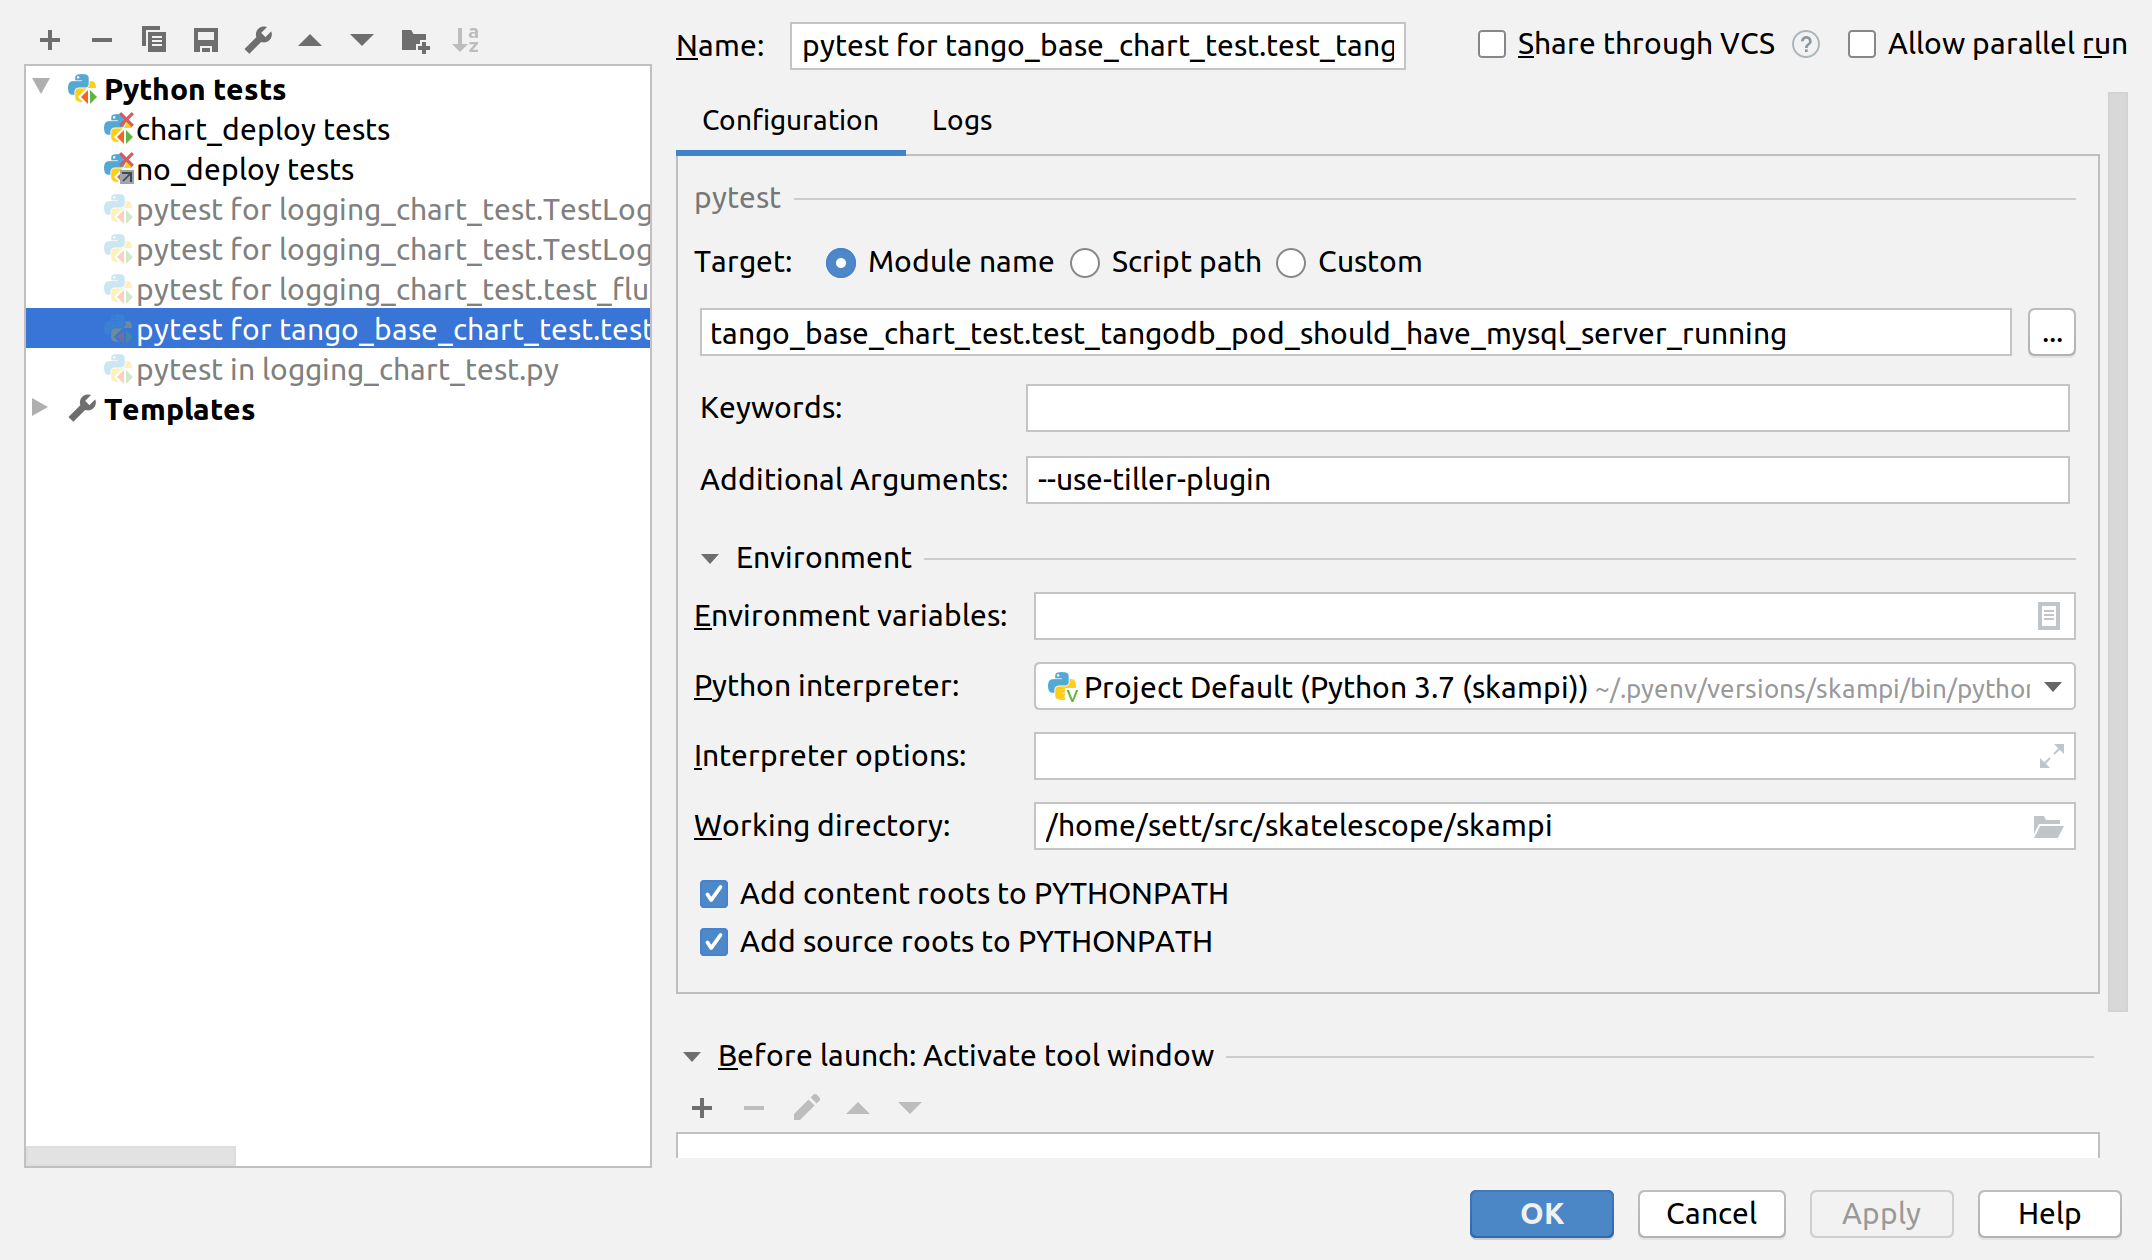 PyCharm config for running specific chart_deploy test